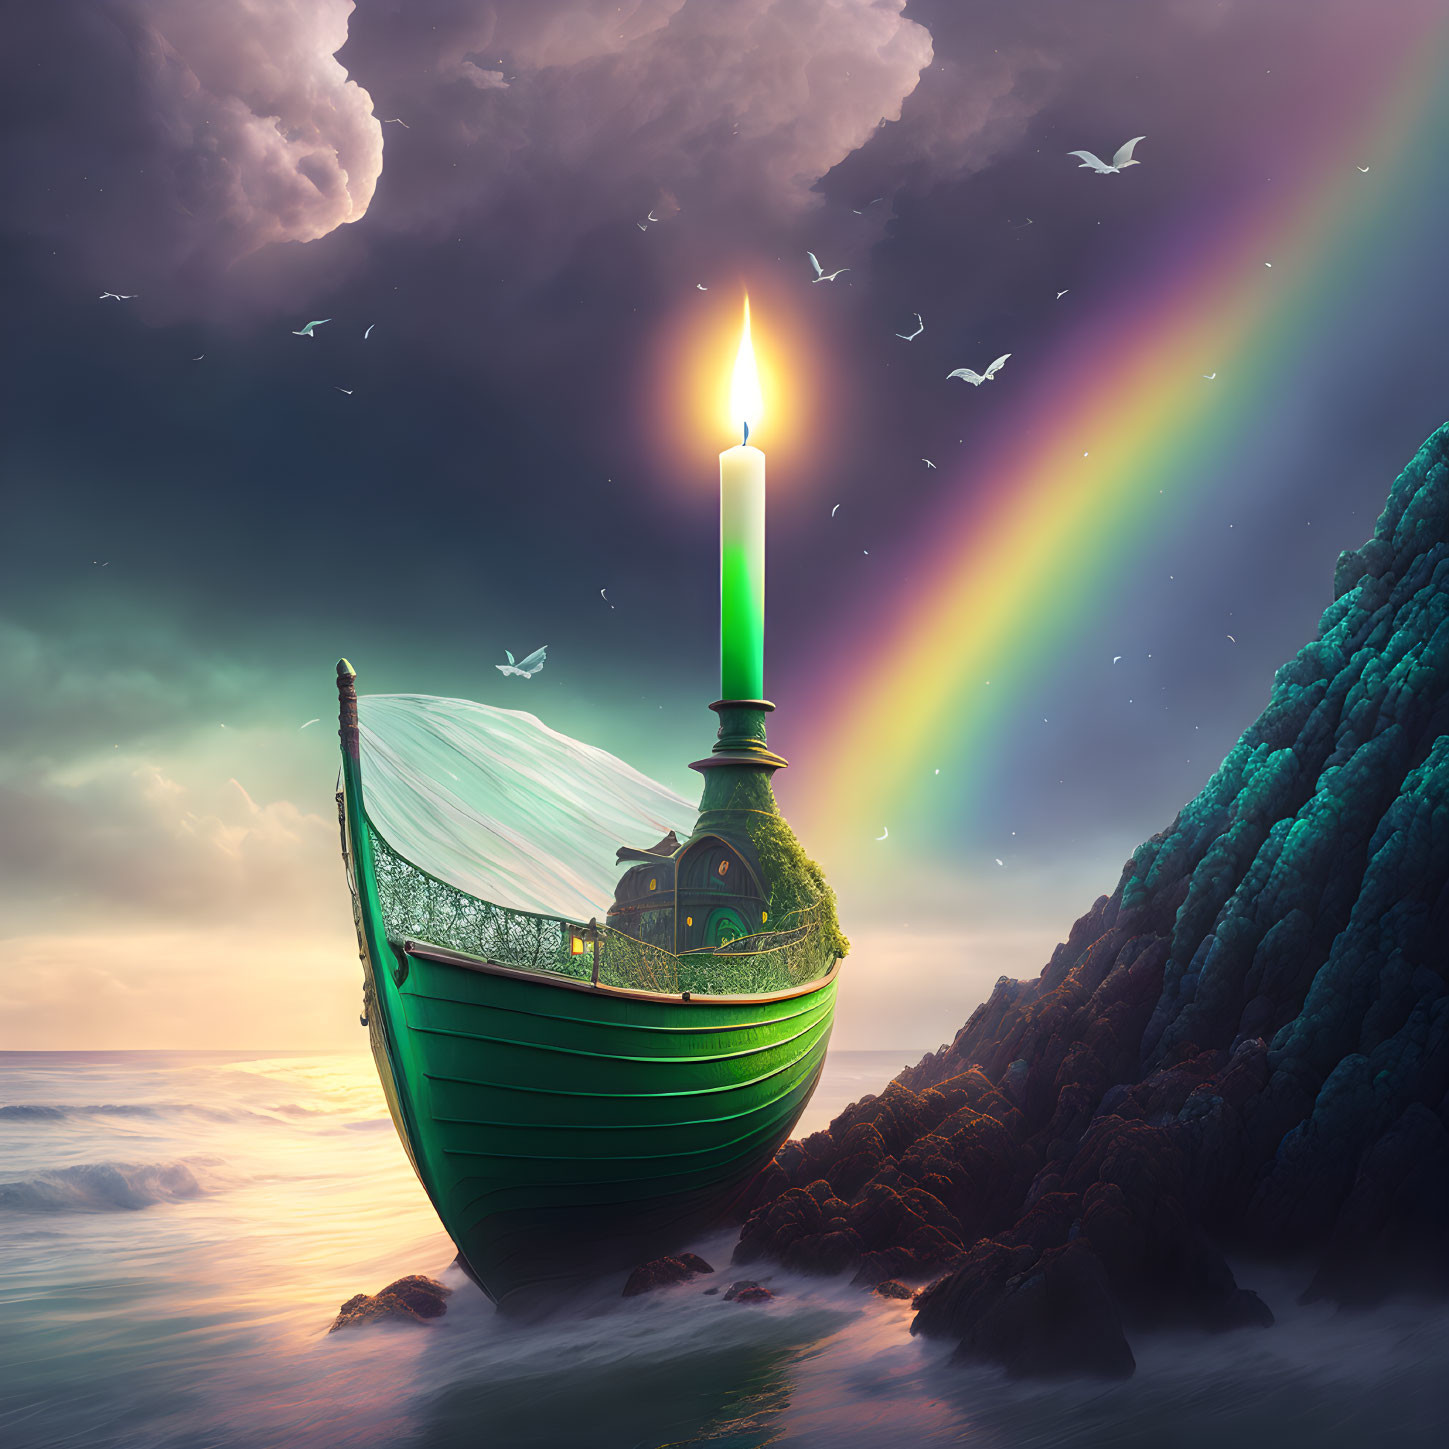 Candlelit boat by the sea with rainbow and birds